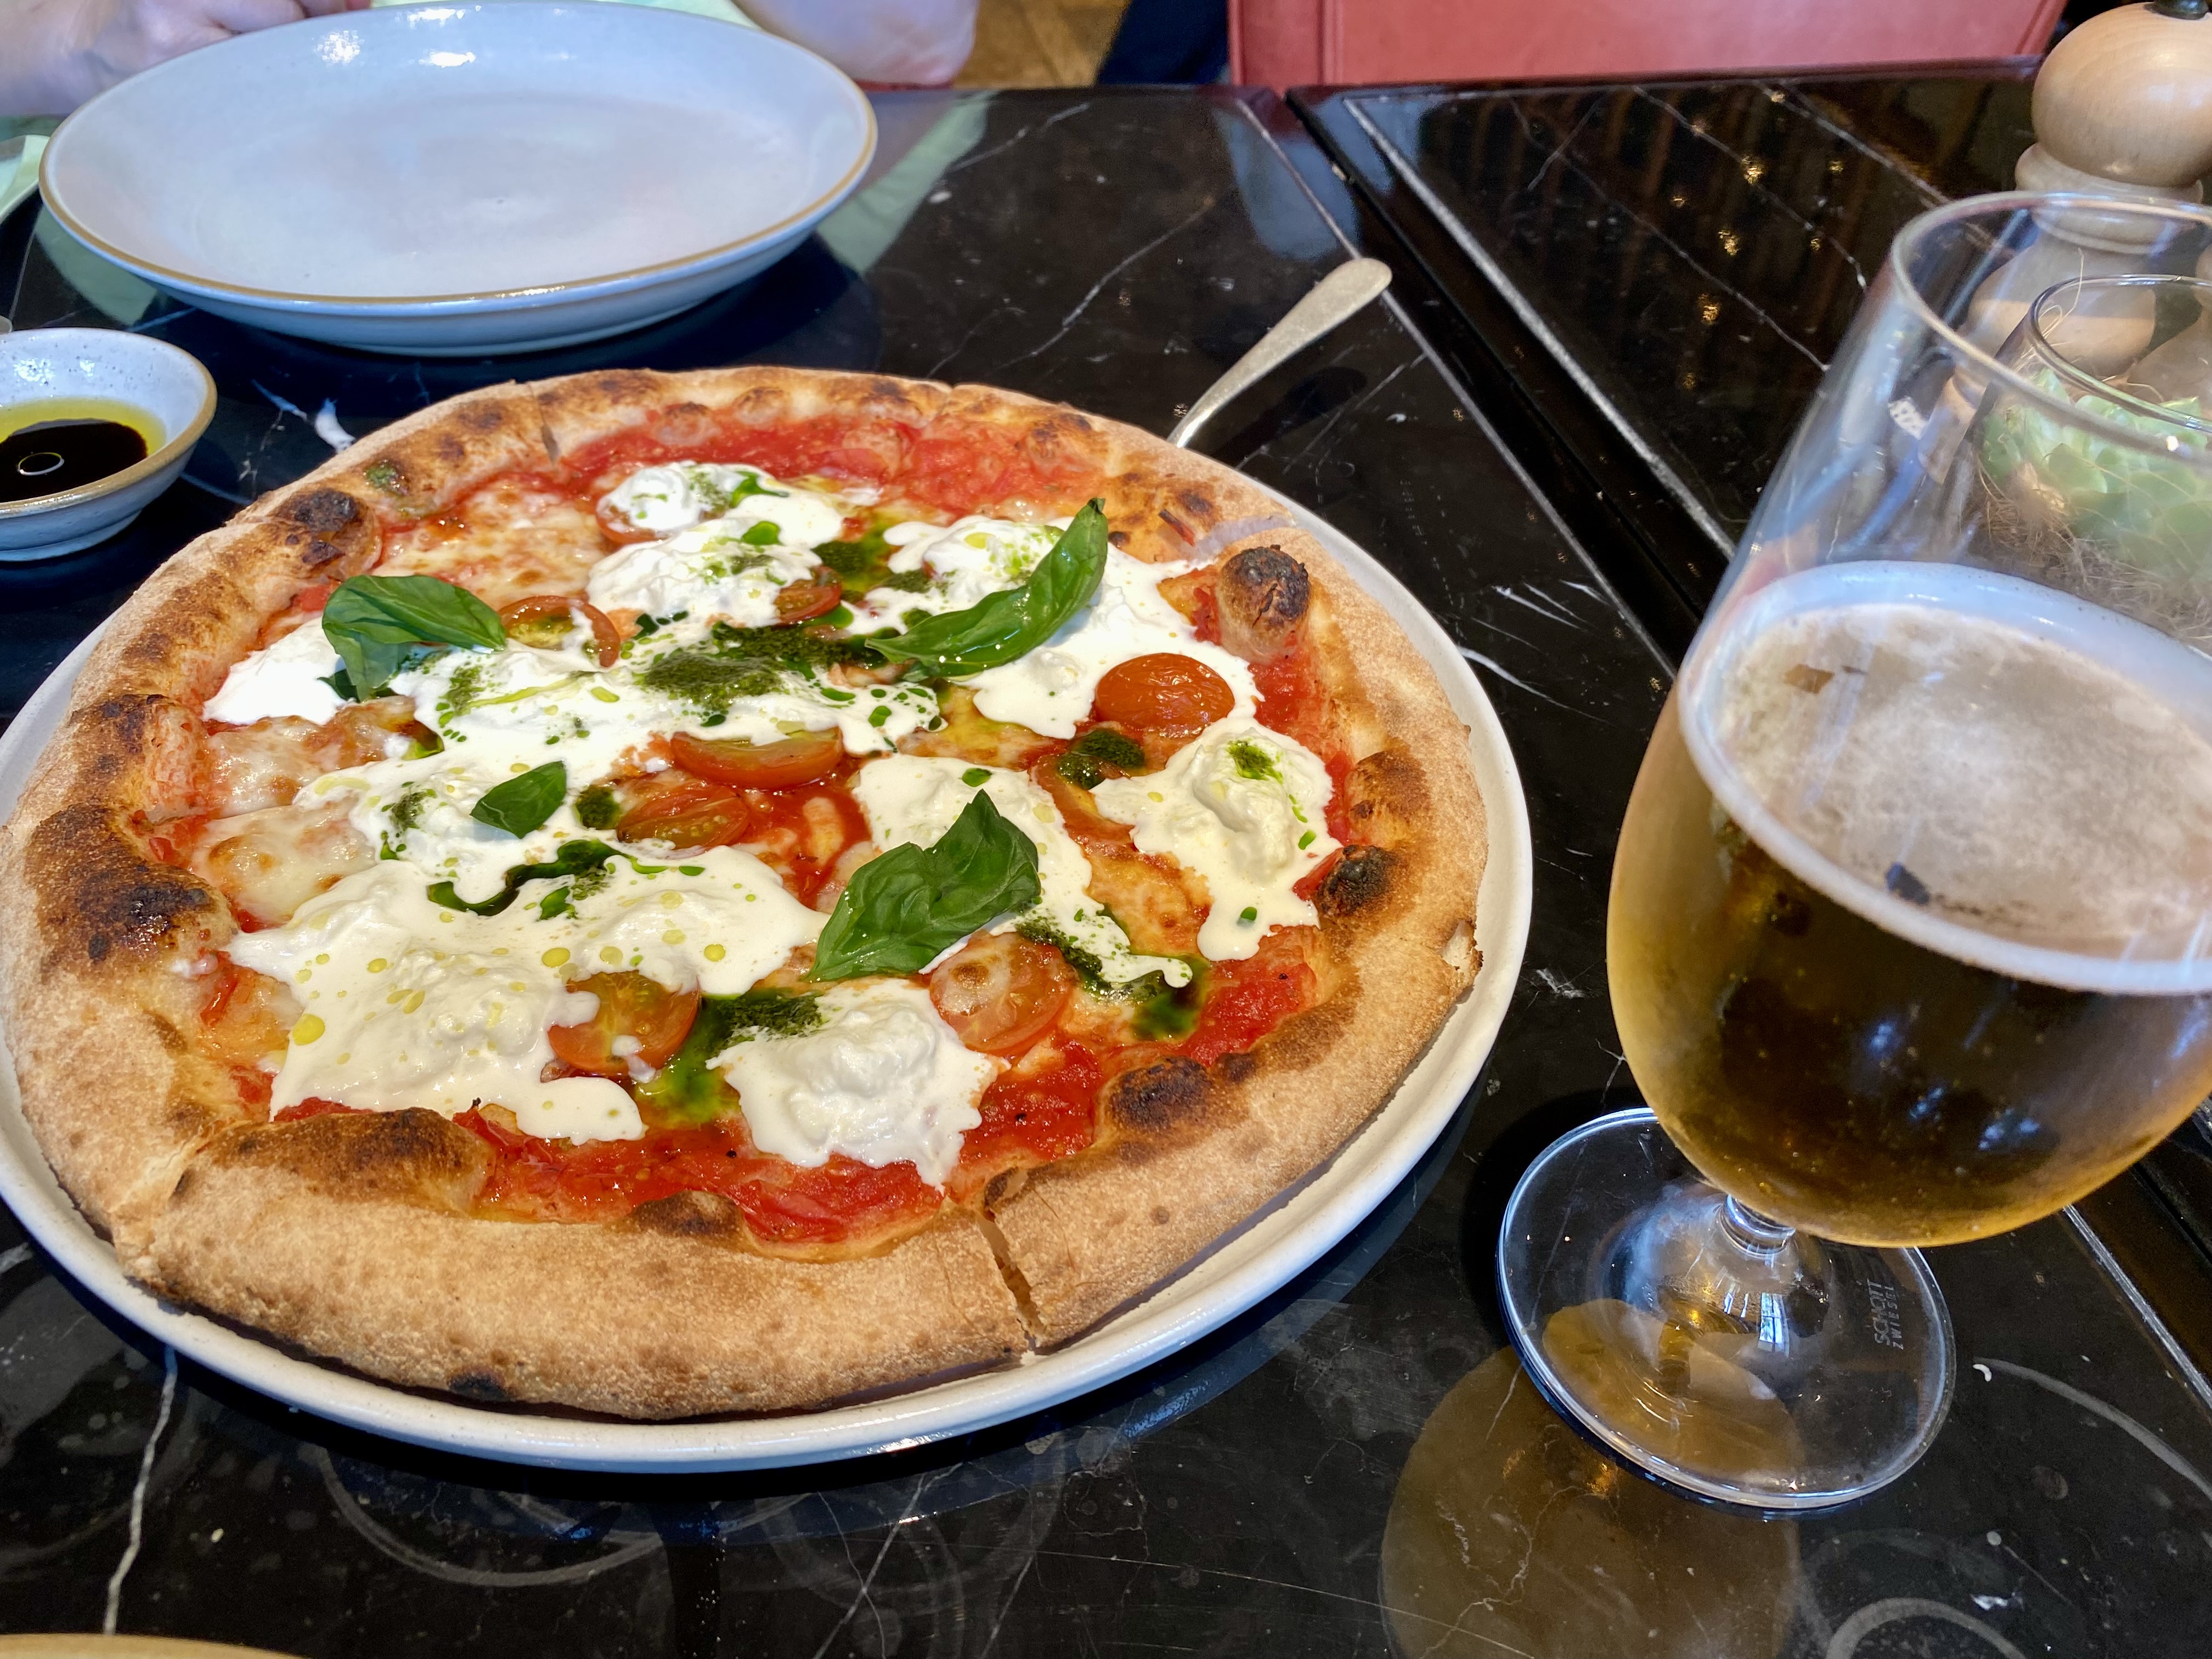 a pizza on a plate next to a glass of beer